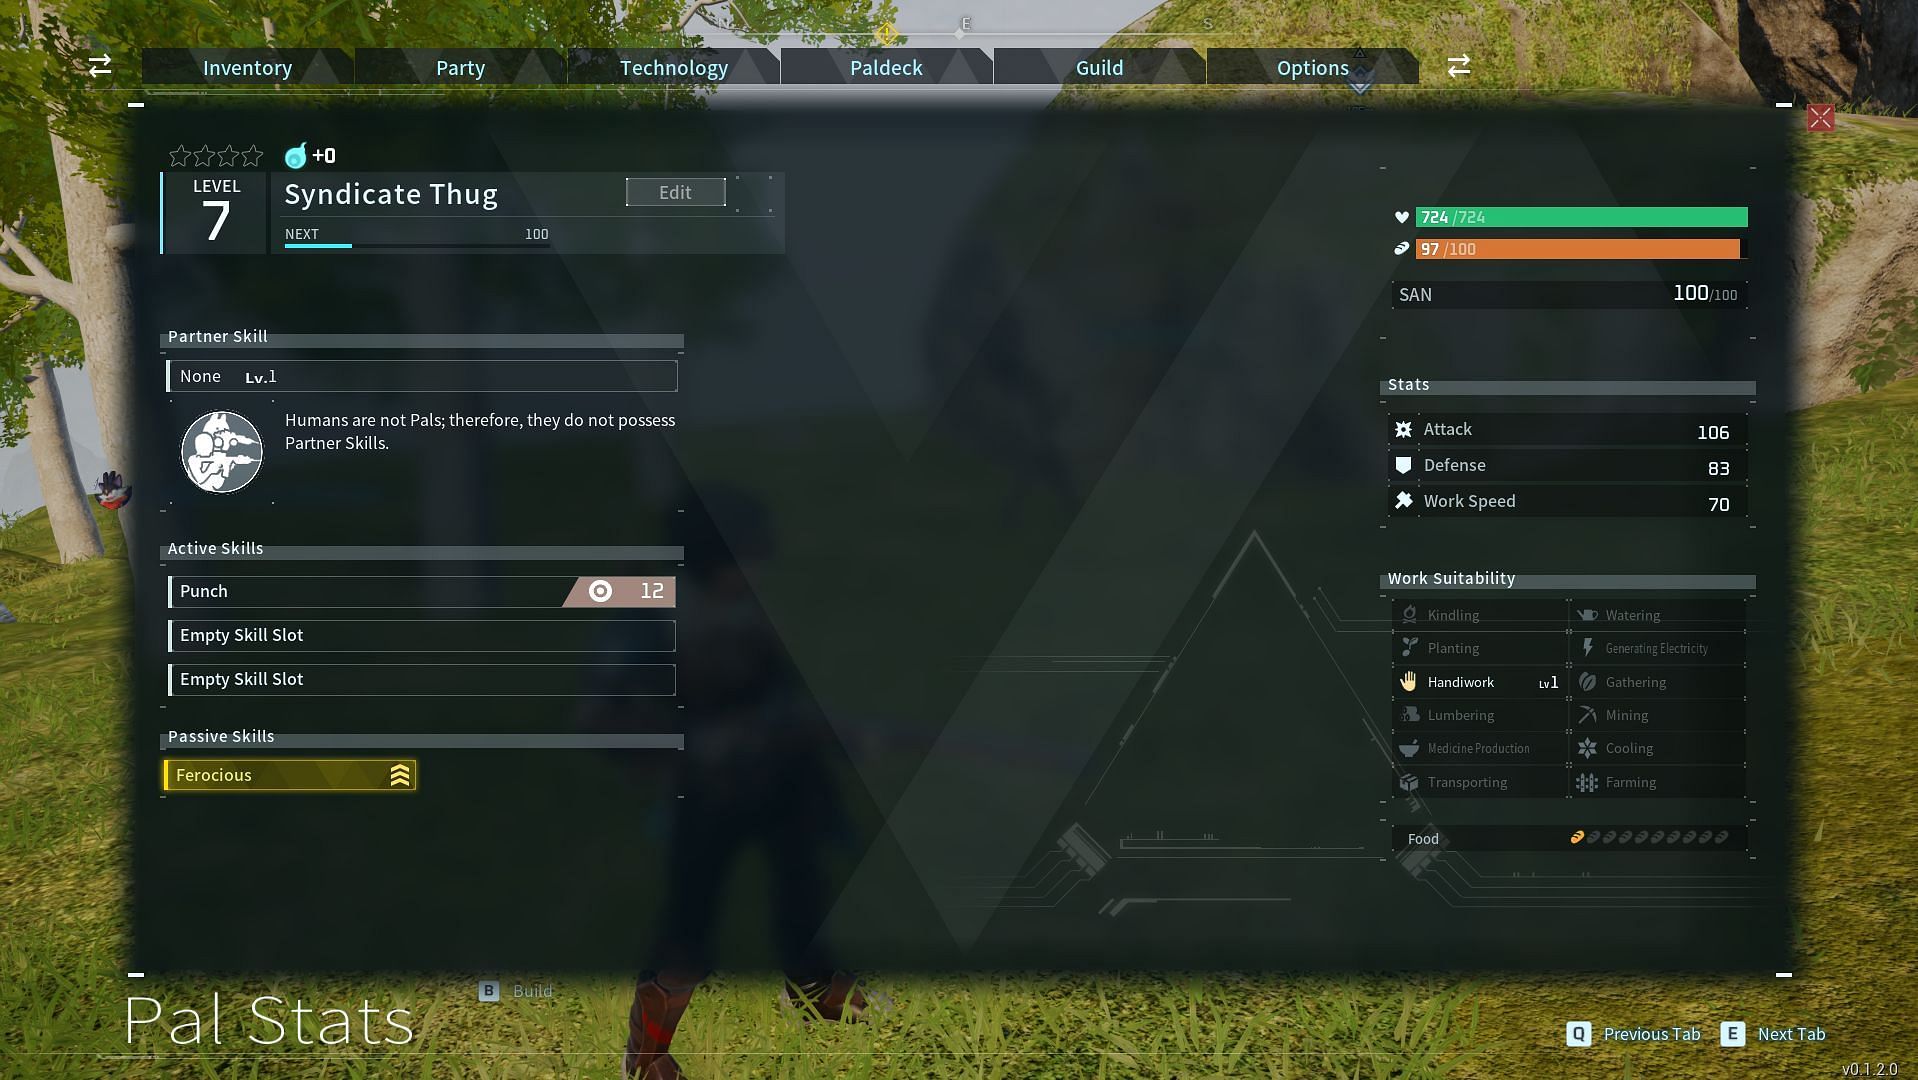 Syndicate Thugs and other Humans are not meant to be caught, so their party status screen is bugged (Screenshot via Sportskeeda)